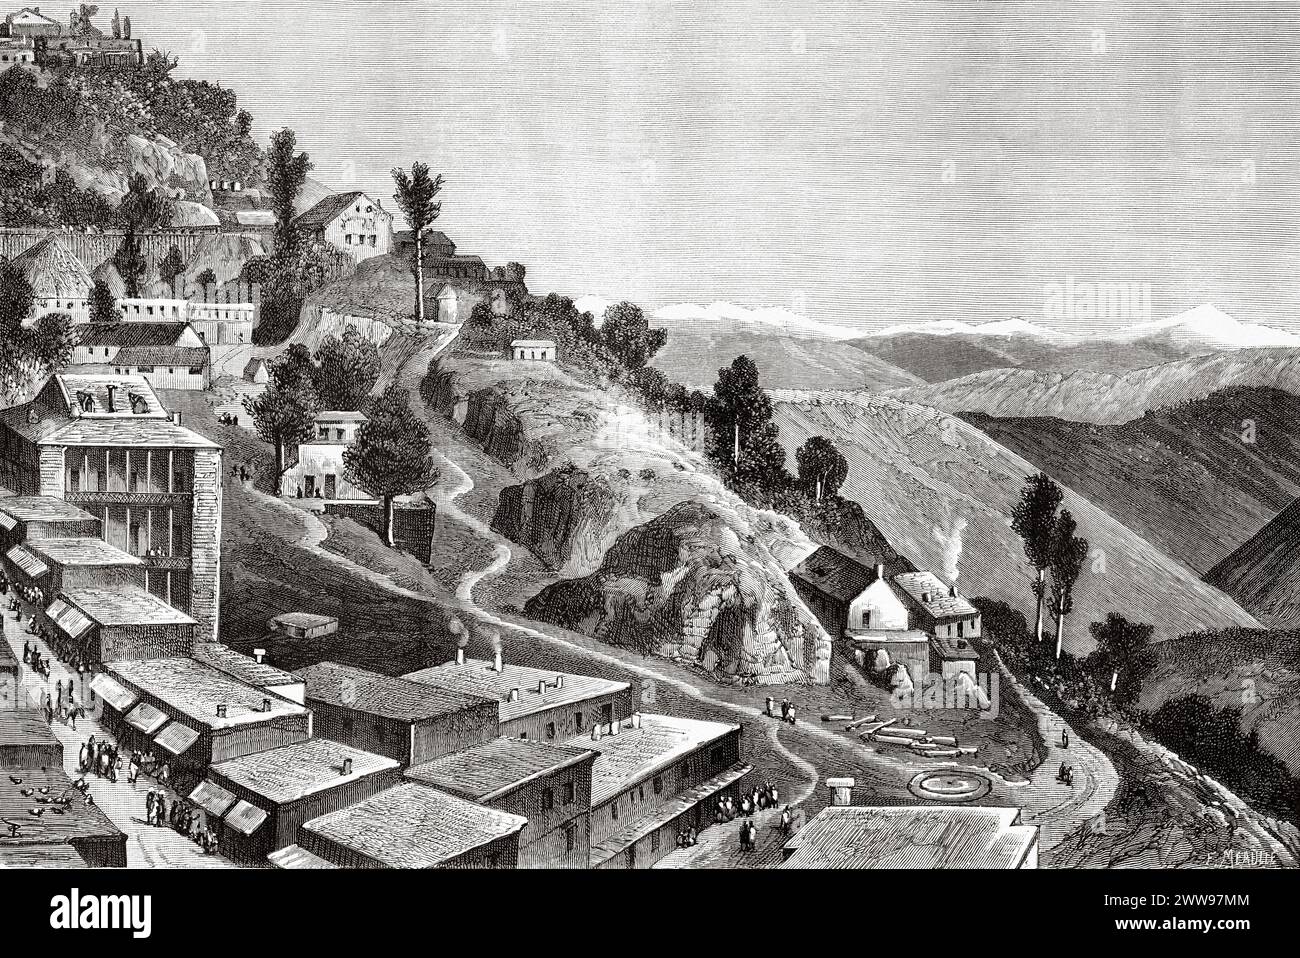 The depot Murree hill station, summer resort and the administrative centre of Murree Tehsil, District of Punjab, Pakistan. Asia. Journey to Murree (Northern Himalayas) 1878. Drawings and texts by Evremond de Berard (1824 – 1881) Le Tour du Monde 1880 Stock Photo